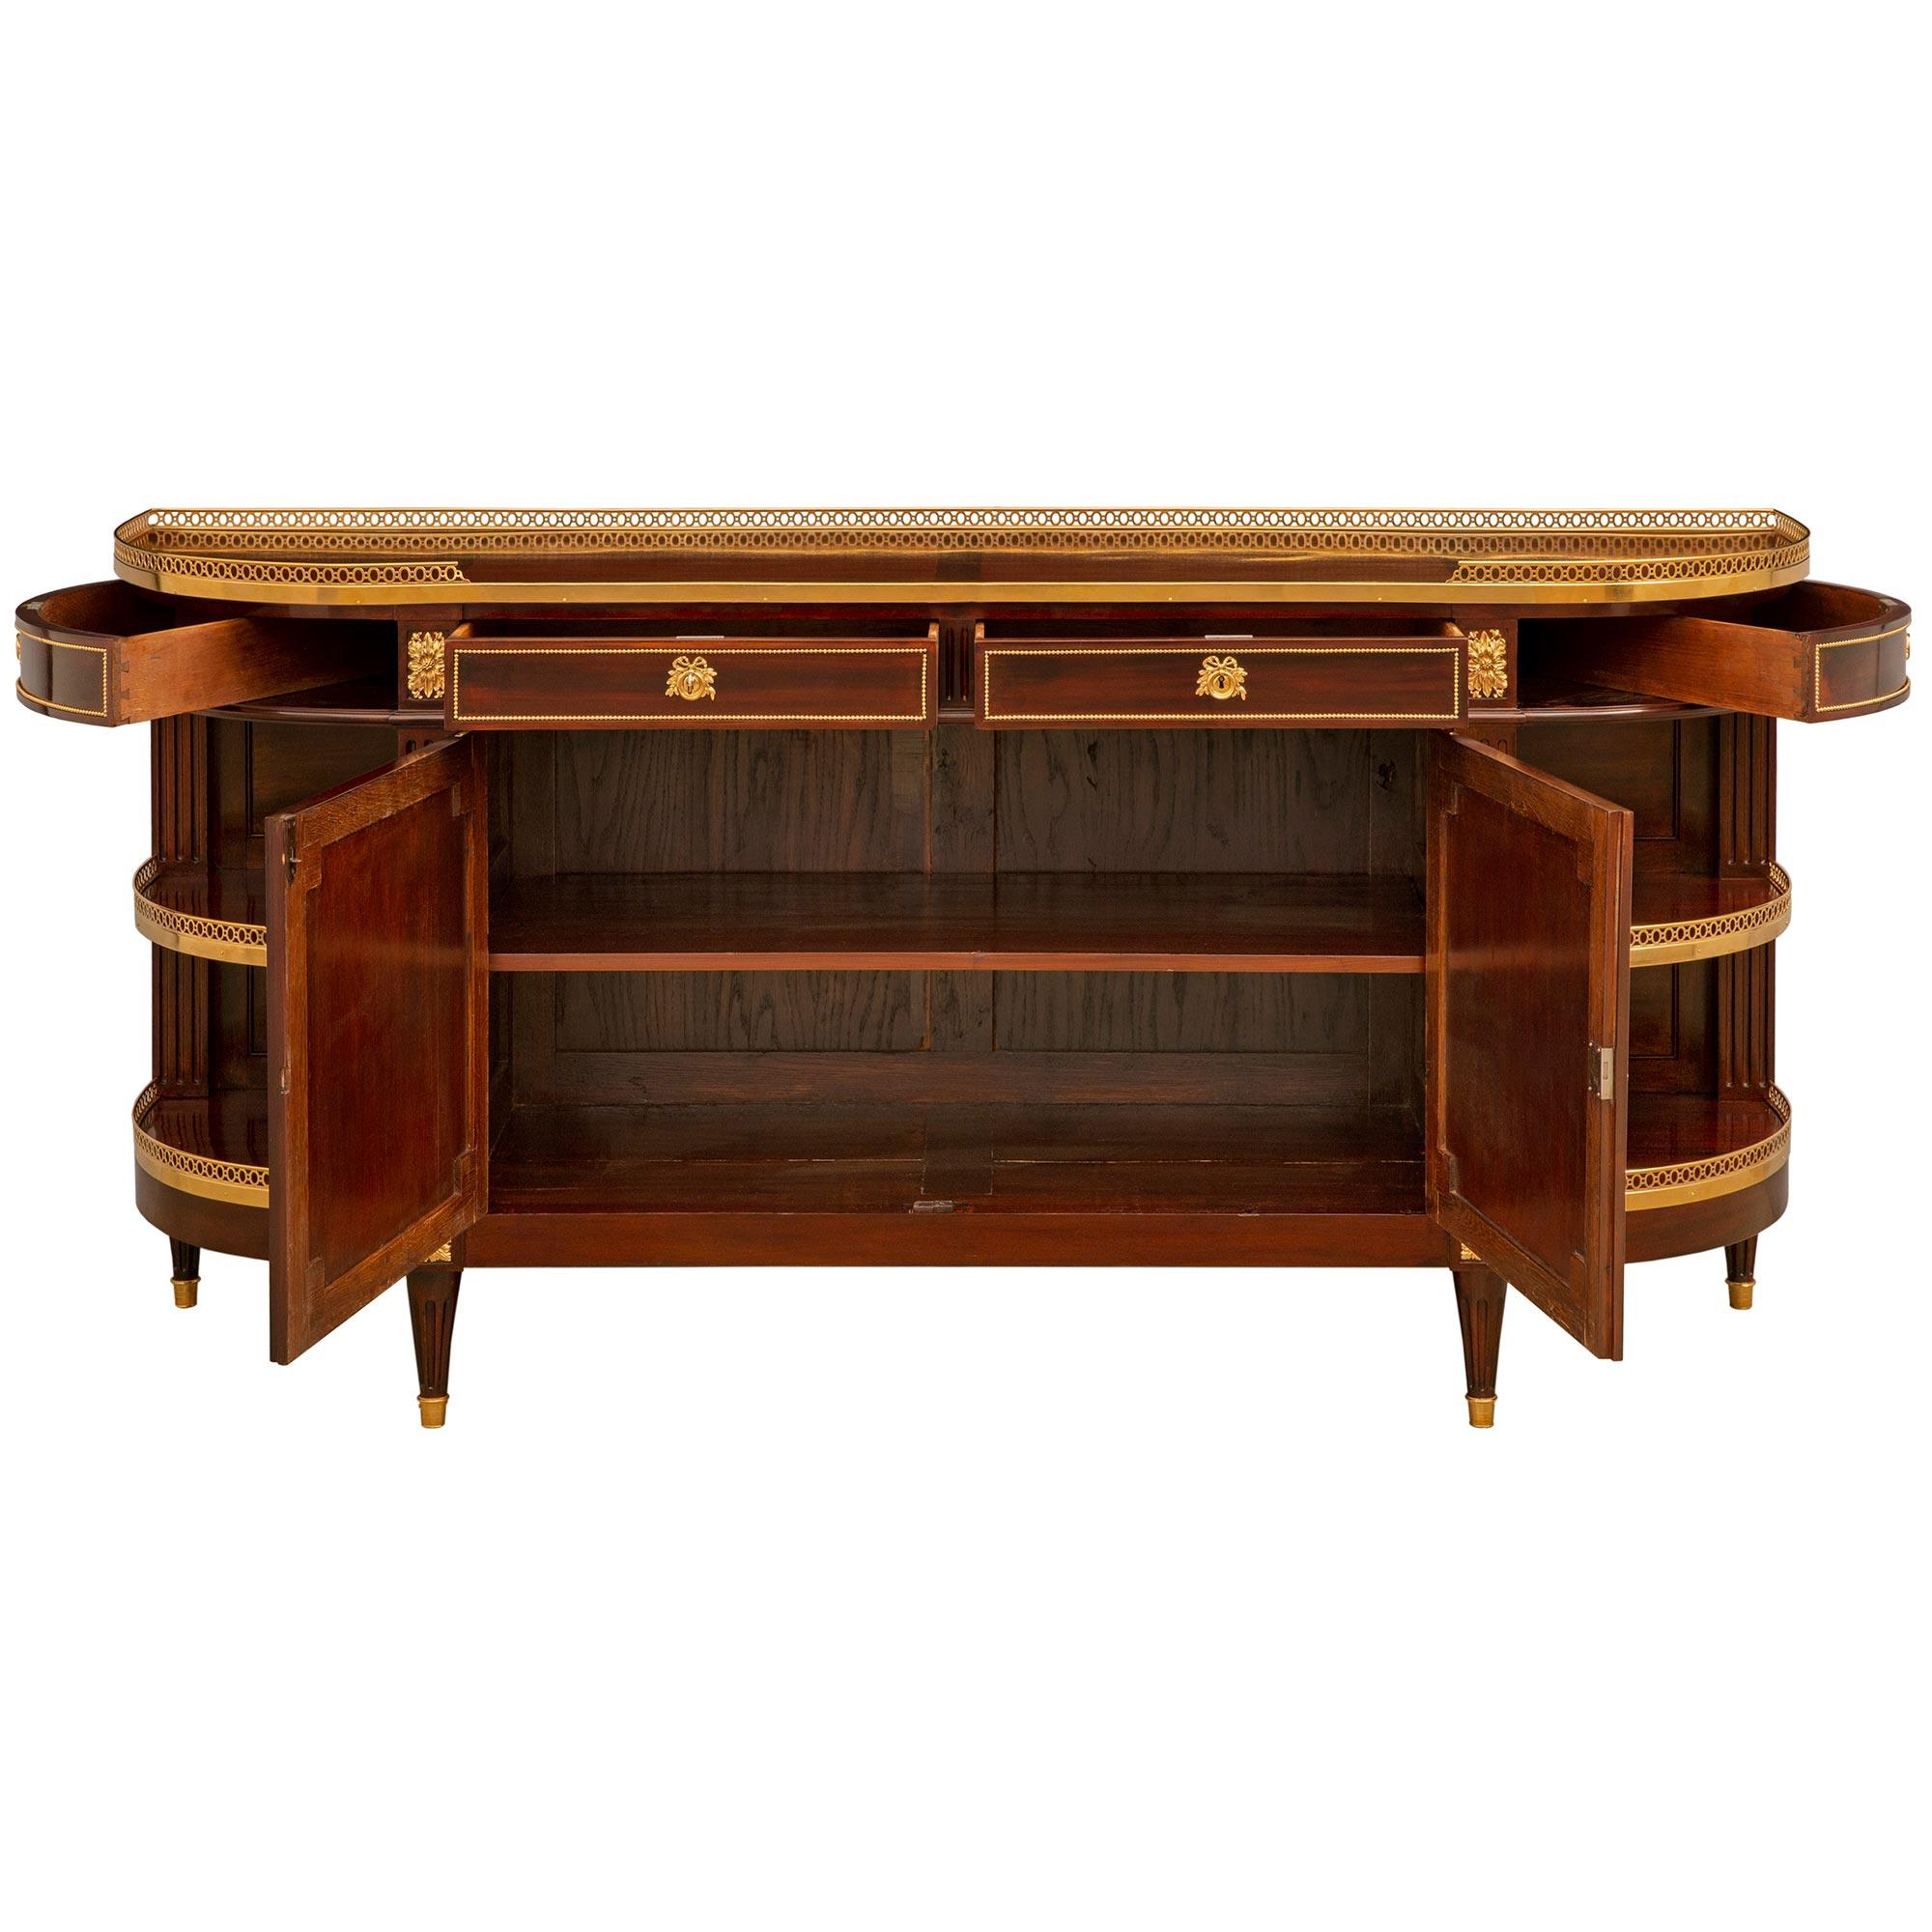 An exceptional and most elegant French 19th century Louis XVI st. Mahogany and Ormolu buffet. The buffet is raised on lovely circular tapered fluted legs with fine mottled Ormolu sabots and below rosettes flanking the Mahogany frieze. Above the